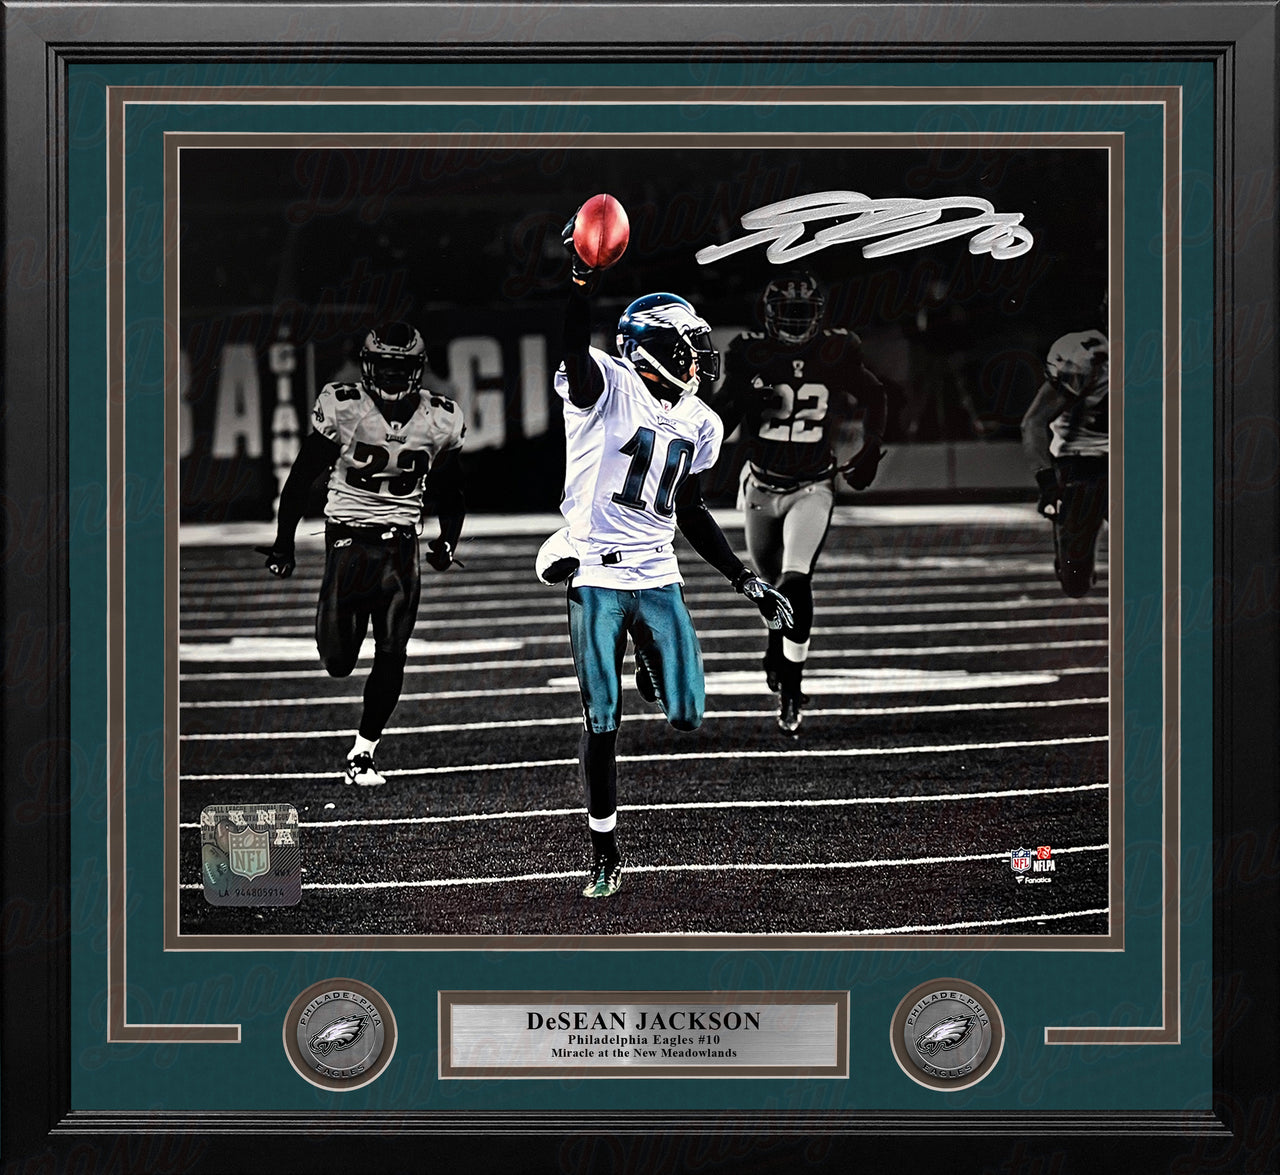 DeSean Jackson Miracle at the New Meadowlands Philadelphia Eagles Autographed 11" x 14" Framed Photo